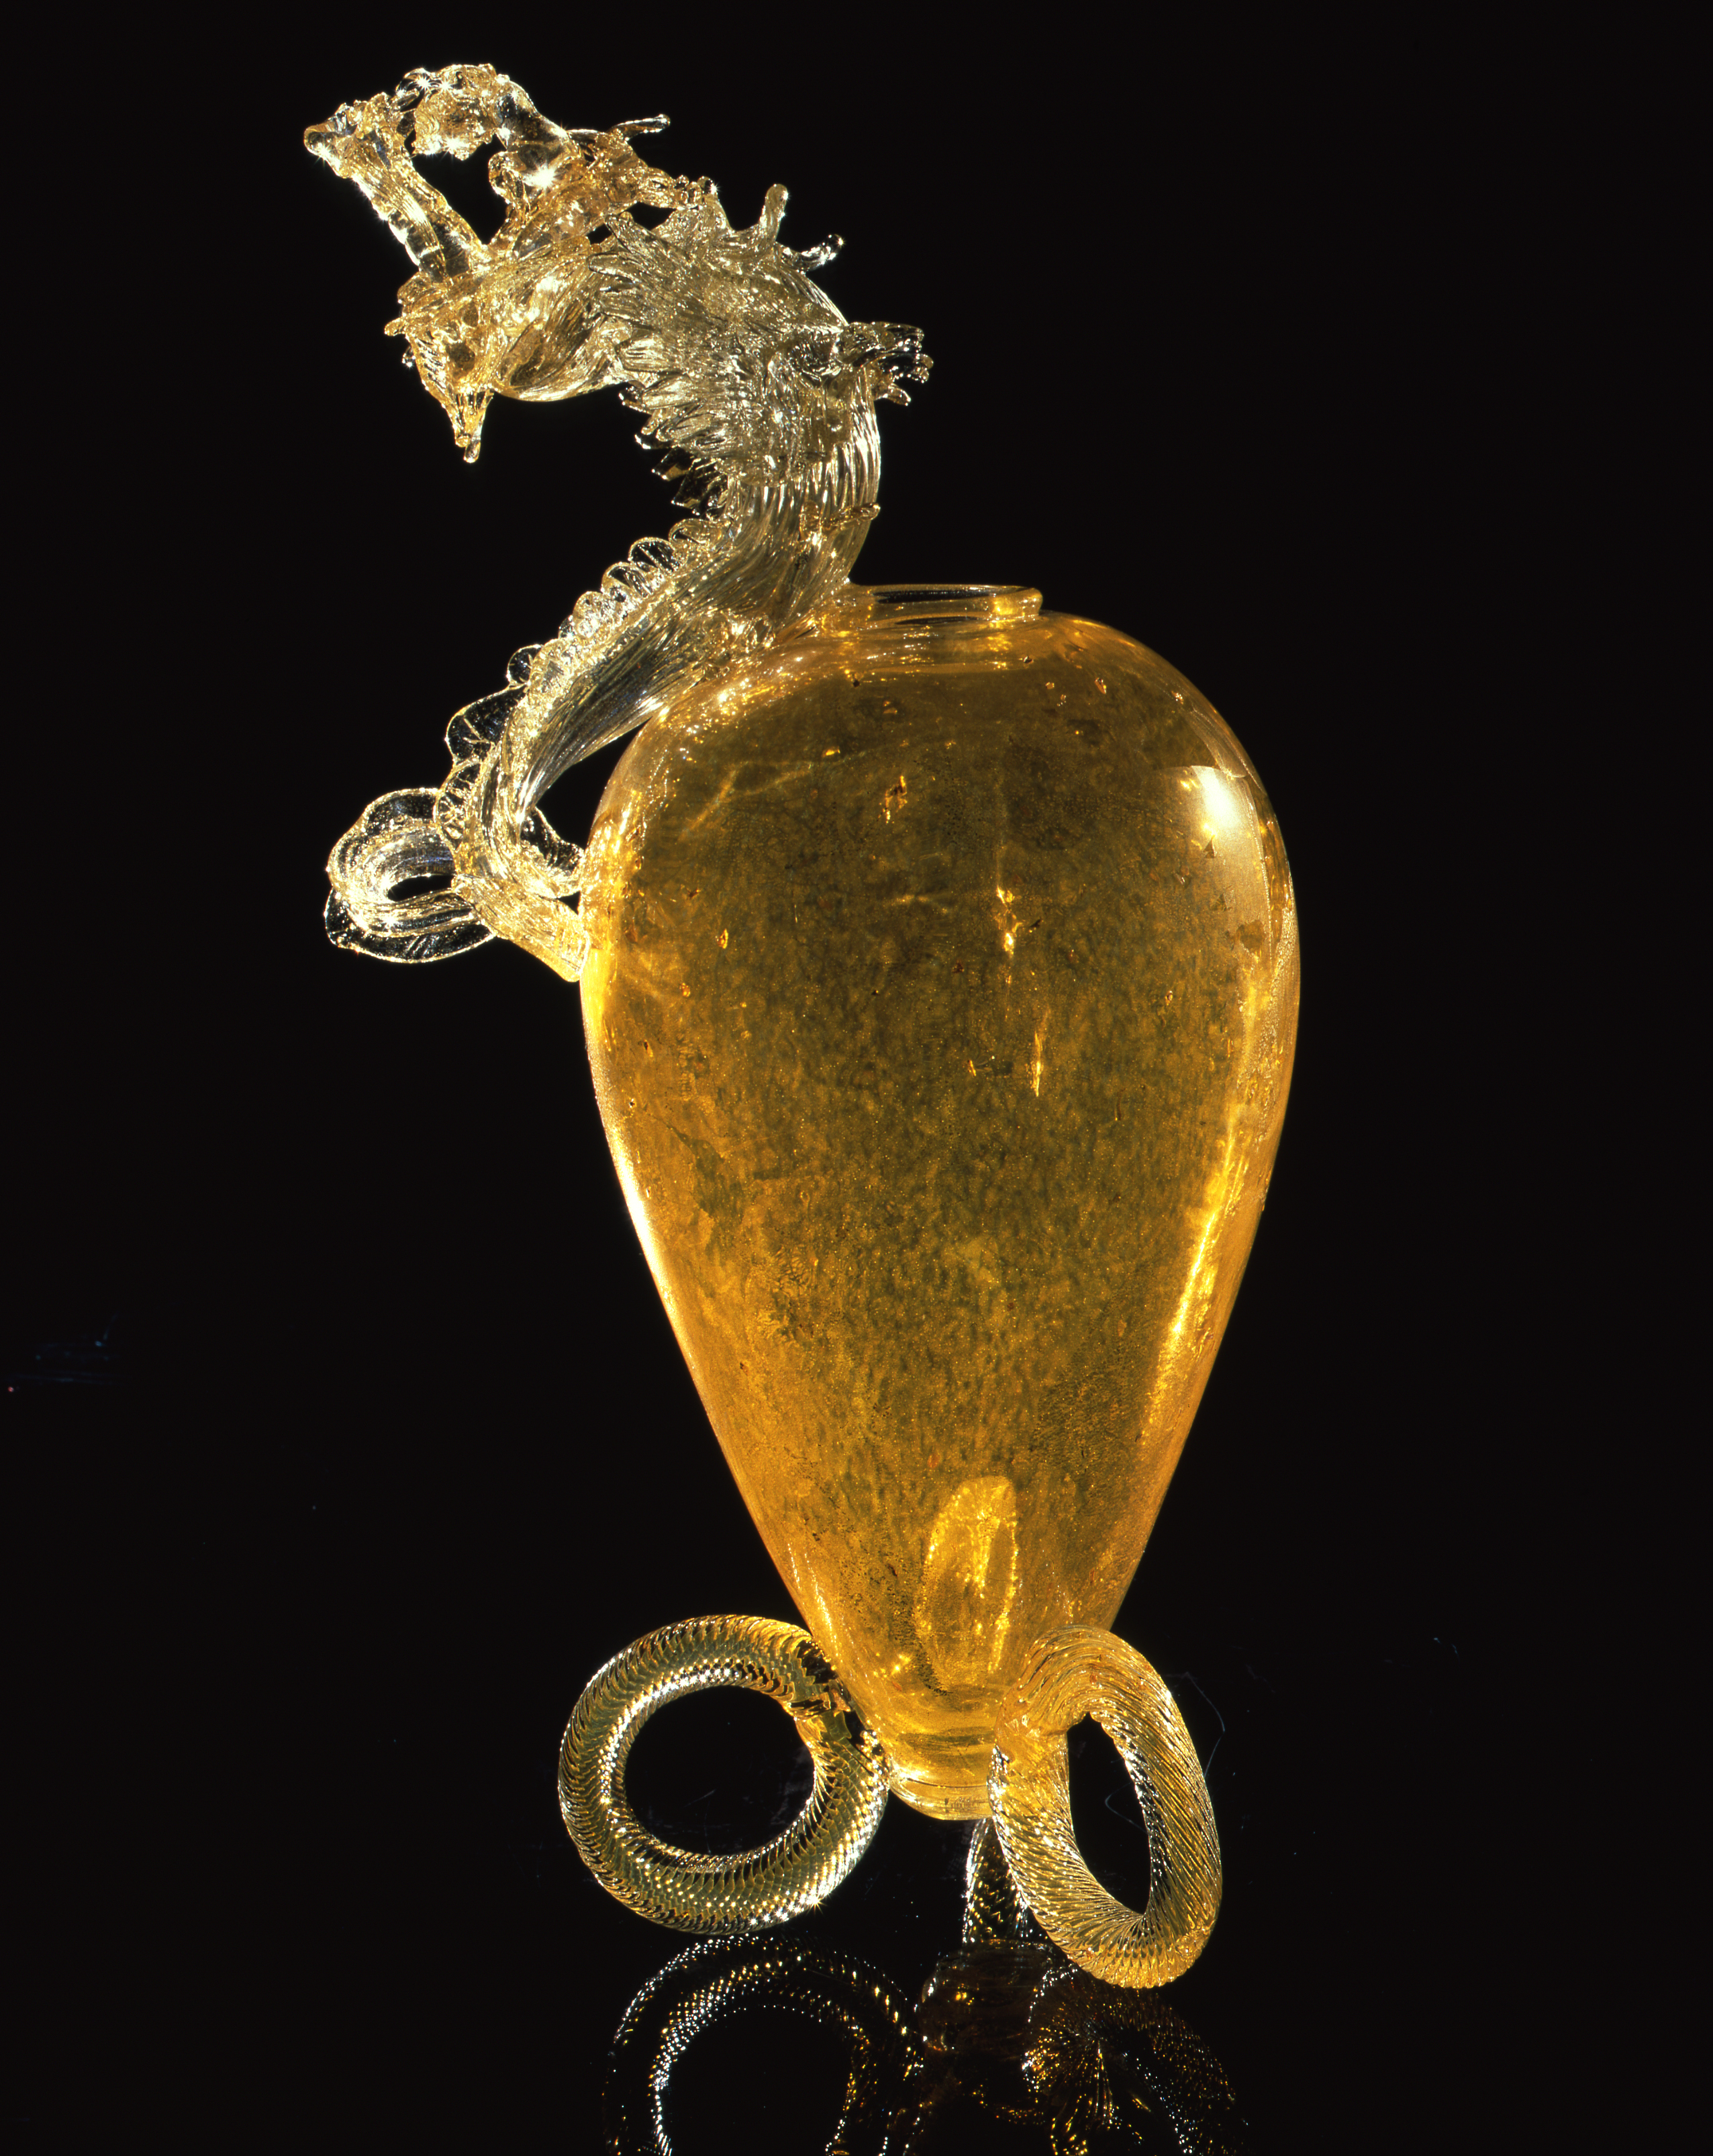  Dale Chihuly,&nbsp; Golden Putti Venetian with Dragon&nbsp; (1994, glass, 27 x 15 x 10 inches) 